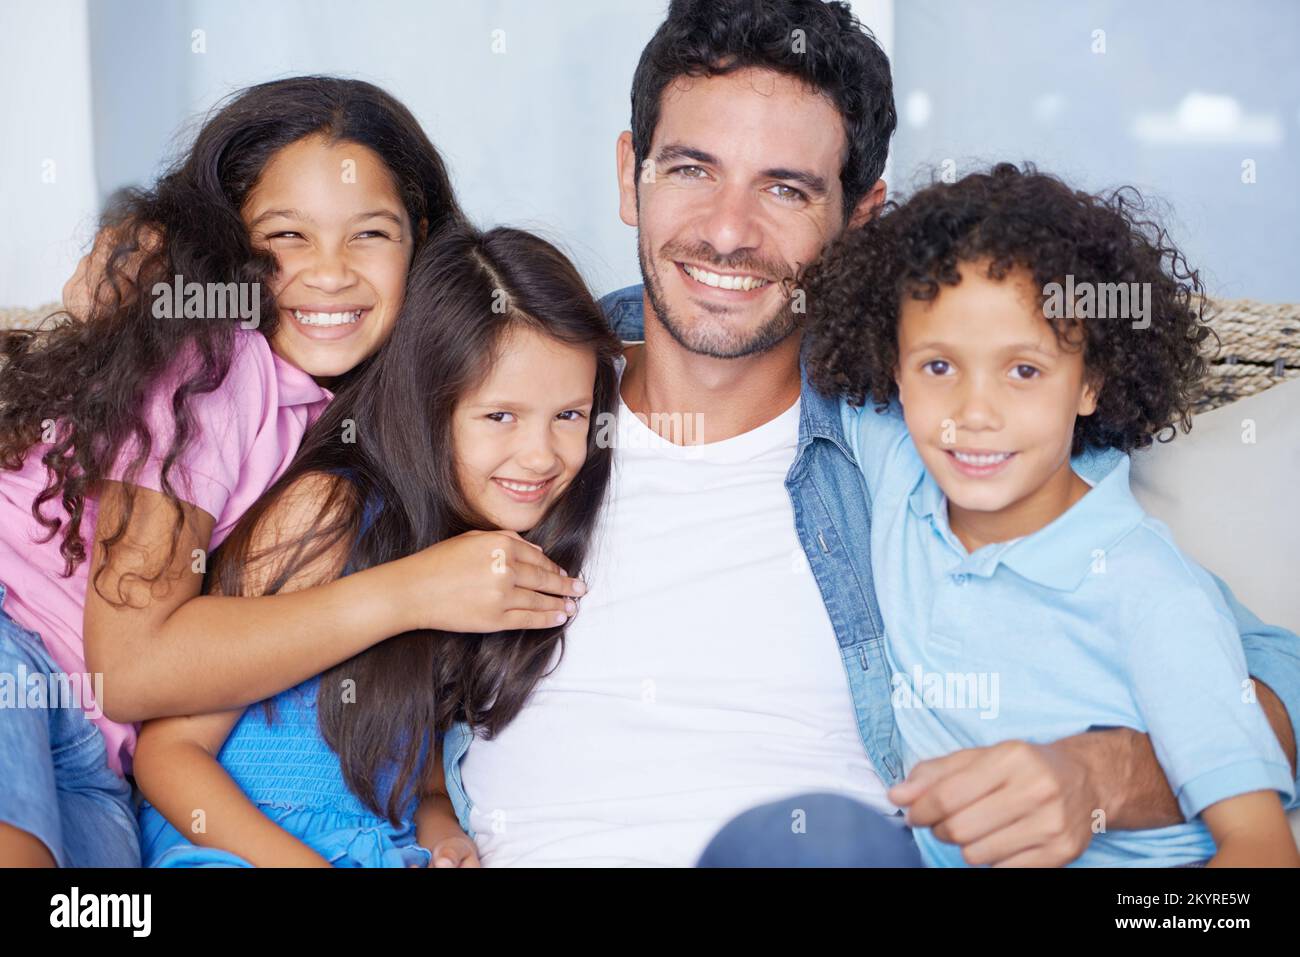 Family ties of love. Portrait of a happy single parent family sitting on a sofa and smiling at the camera. Stock Photo